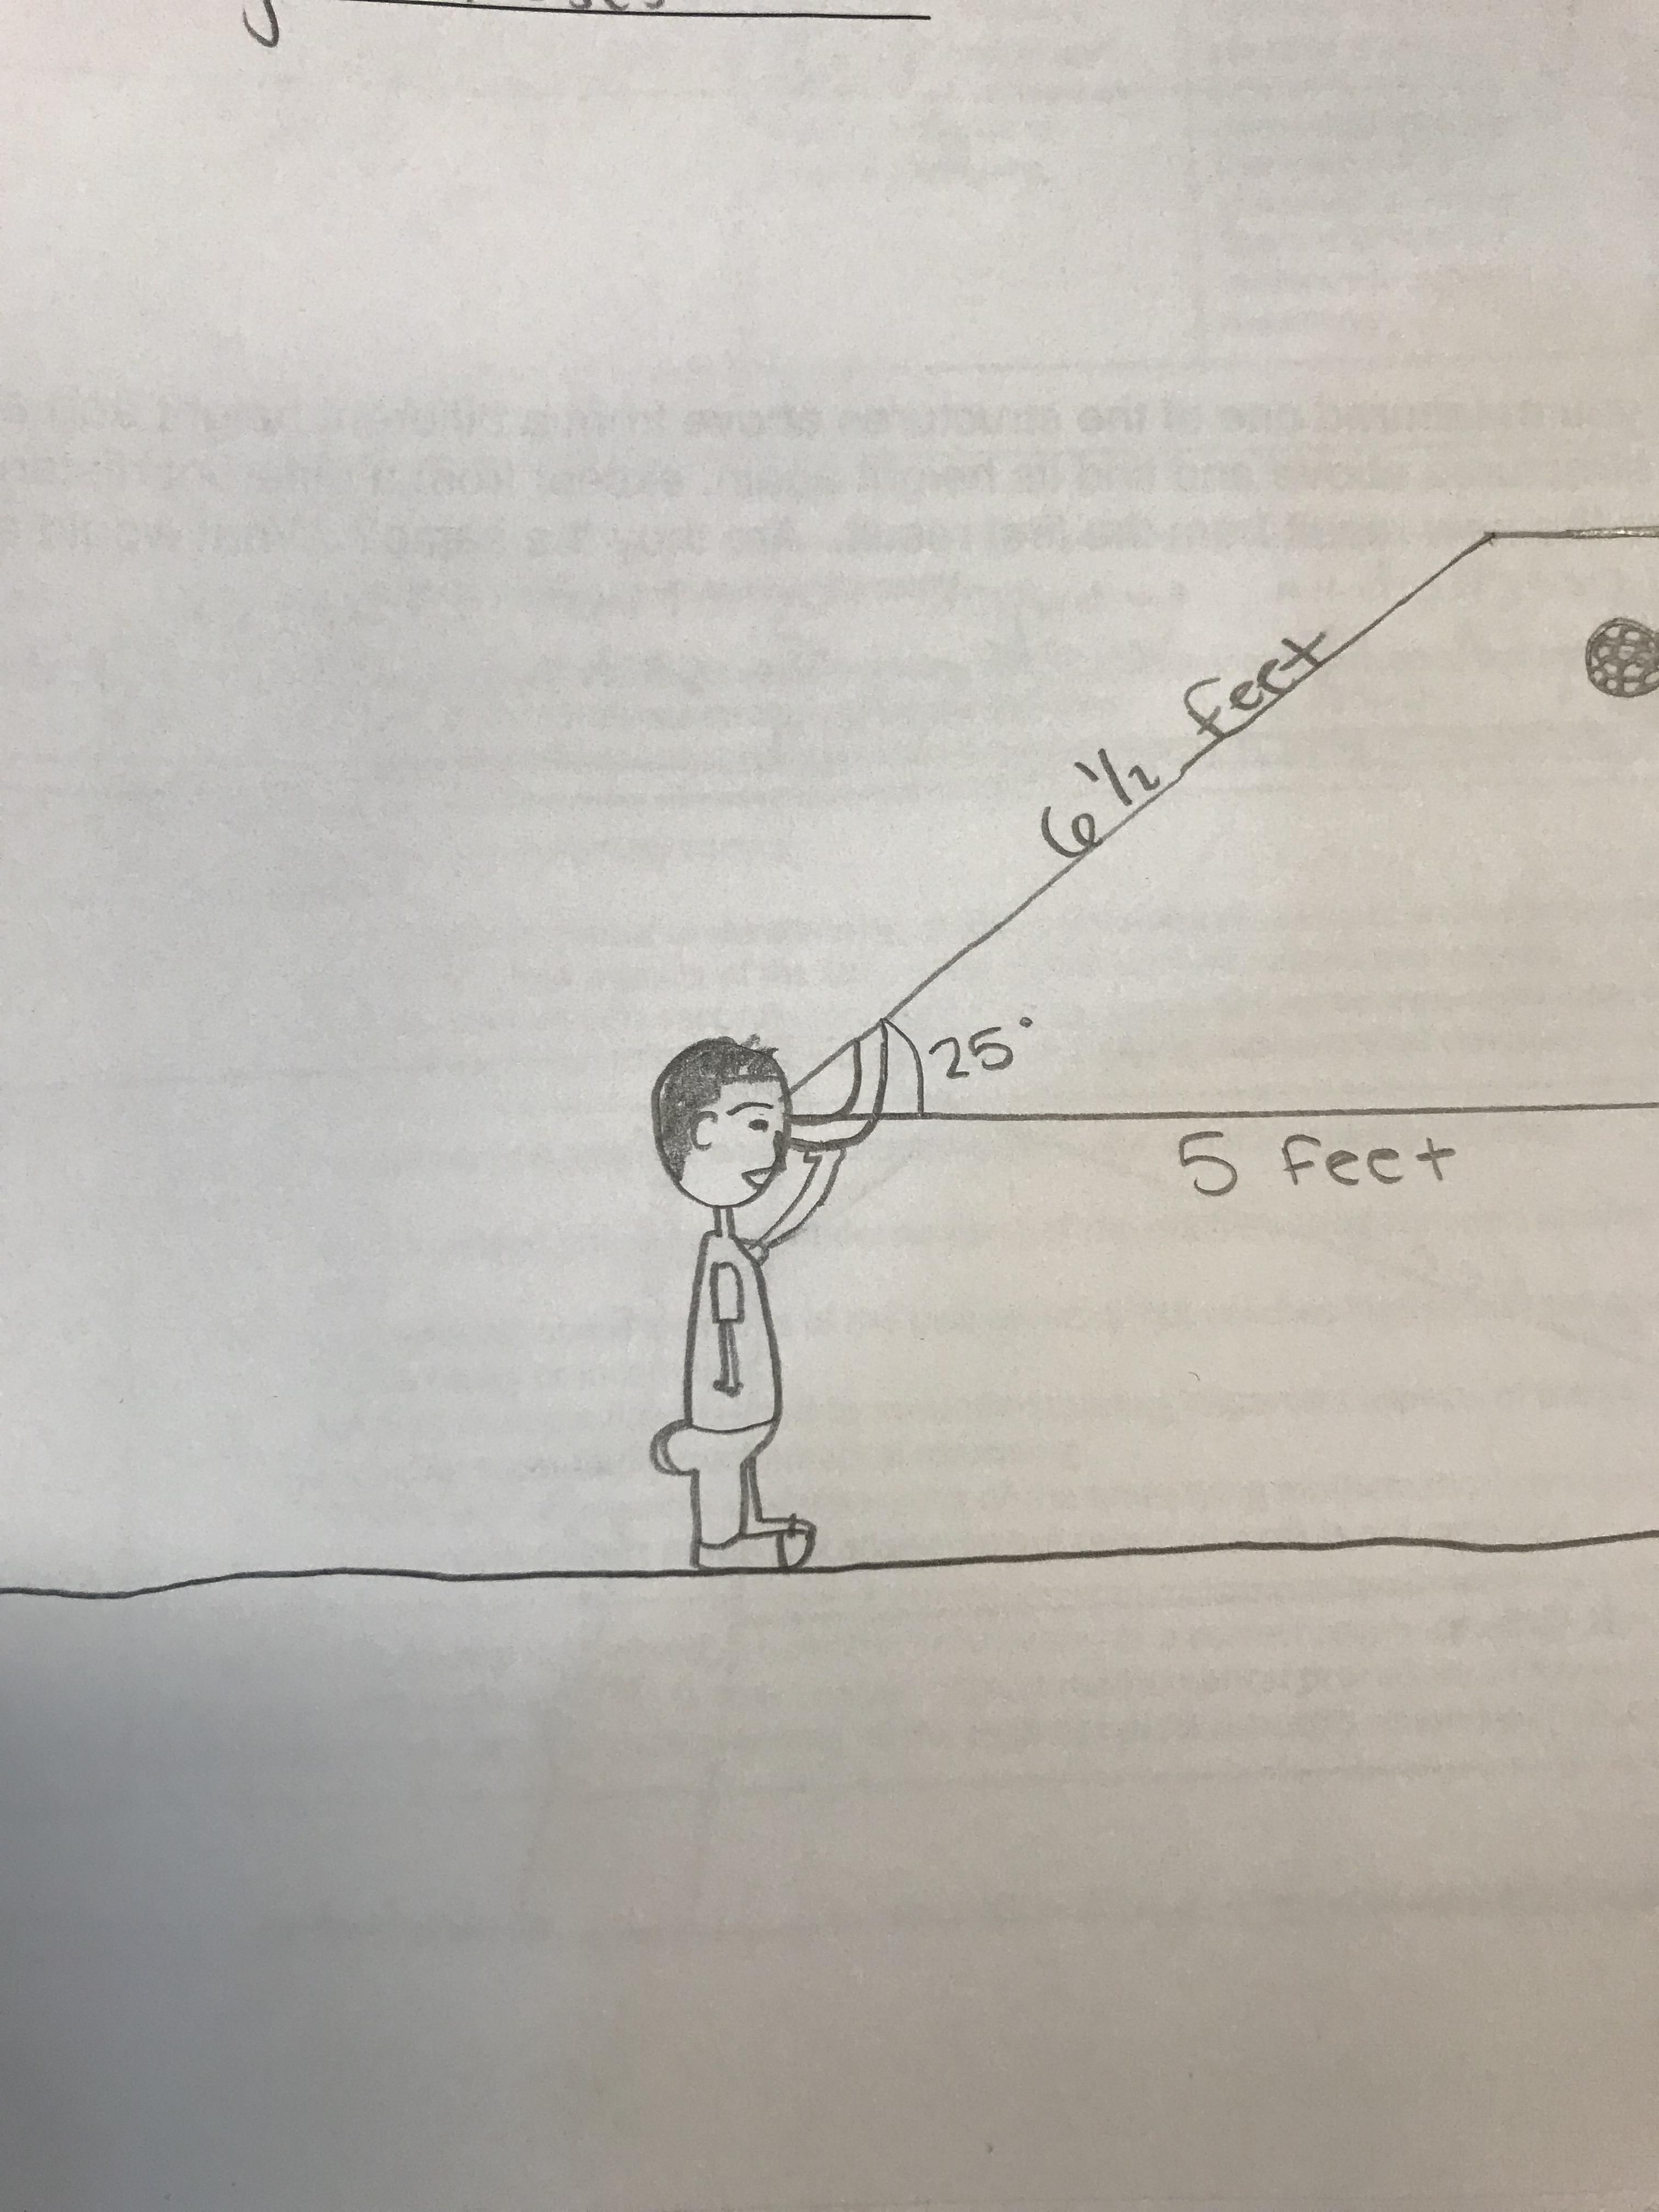 One of my students draws little booties on the characters in his illustrations of word problems and I can’t stop laughing.